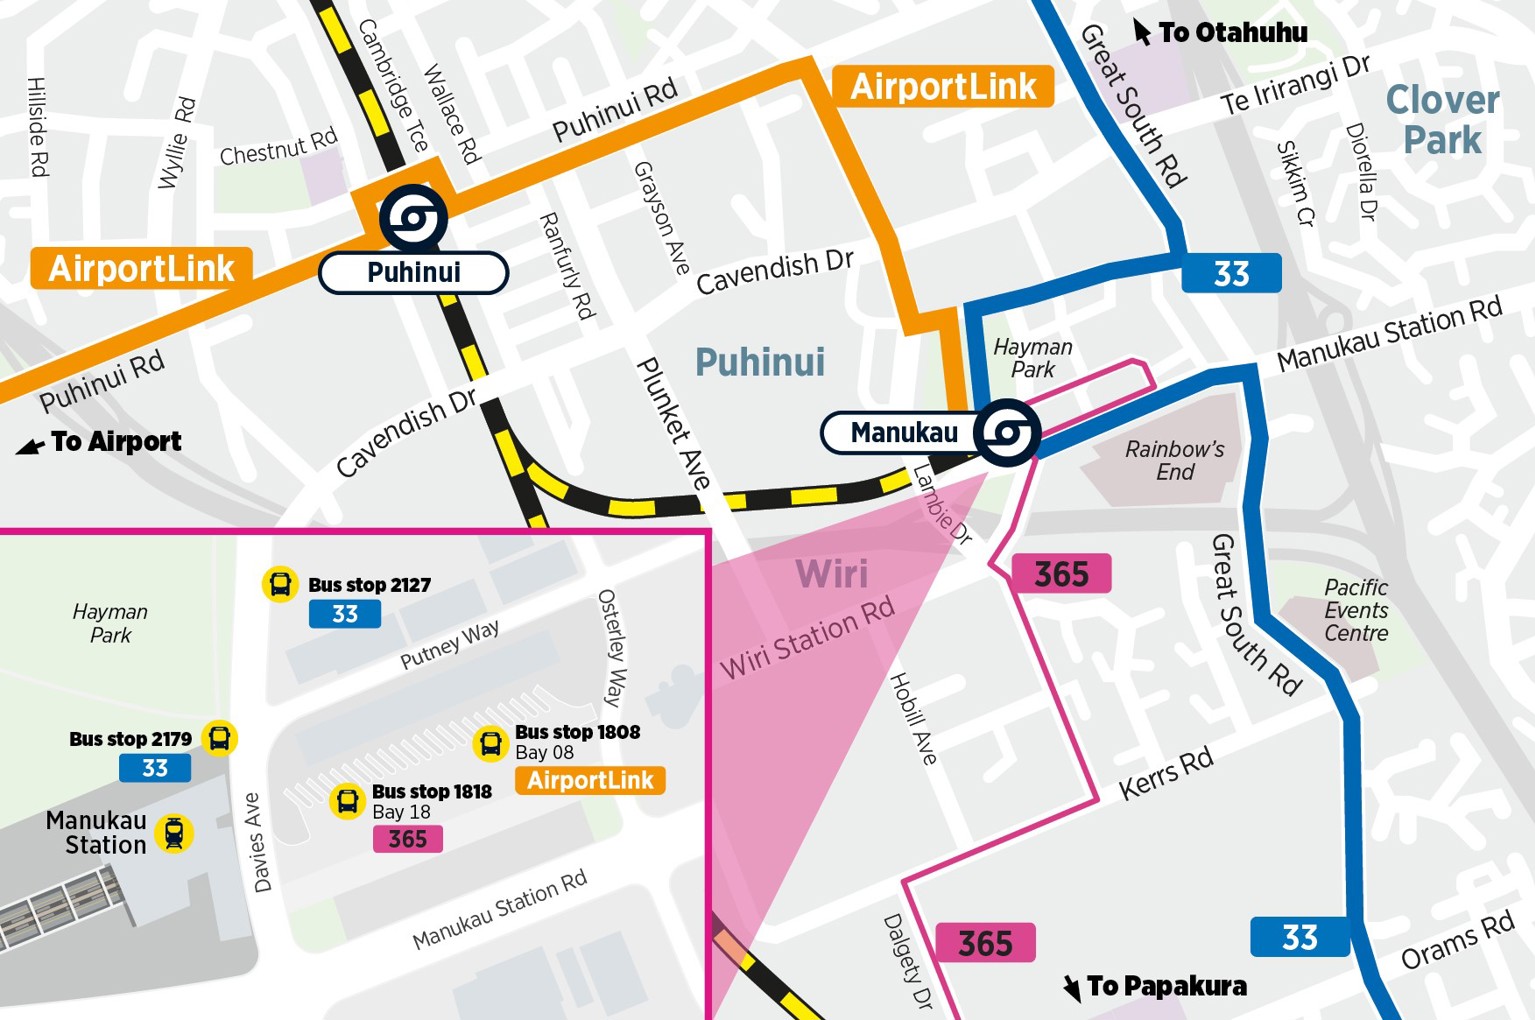 Map of alternative routes from Manukau Station